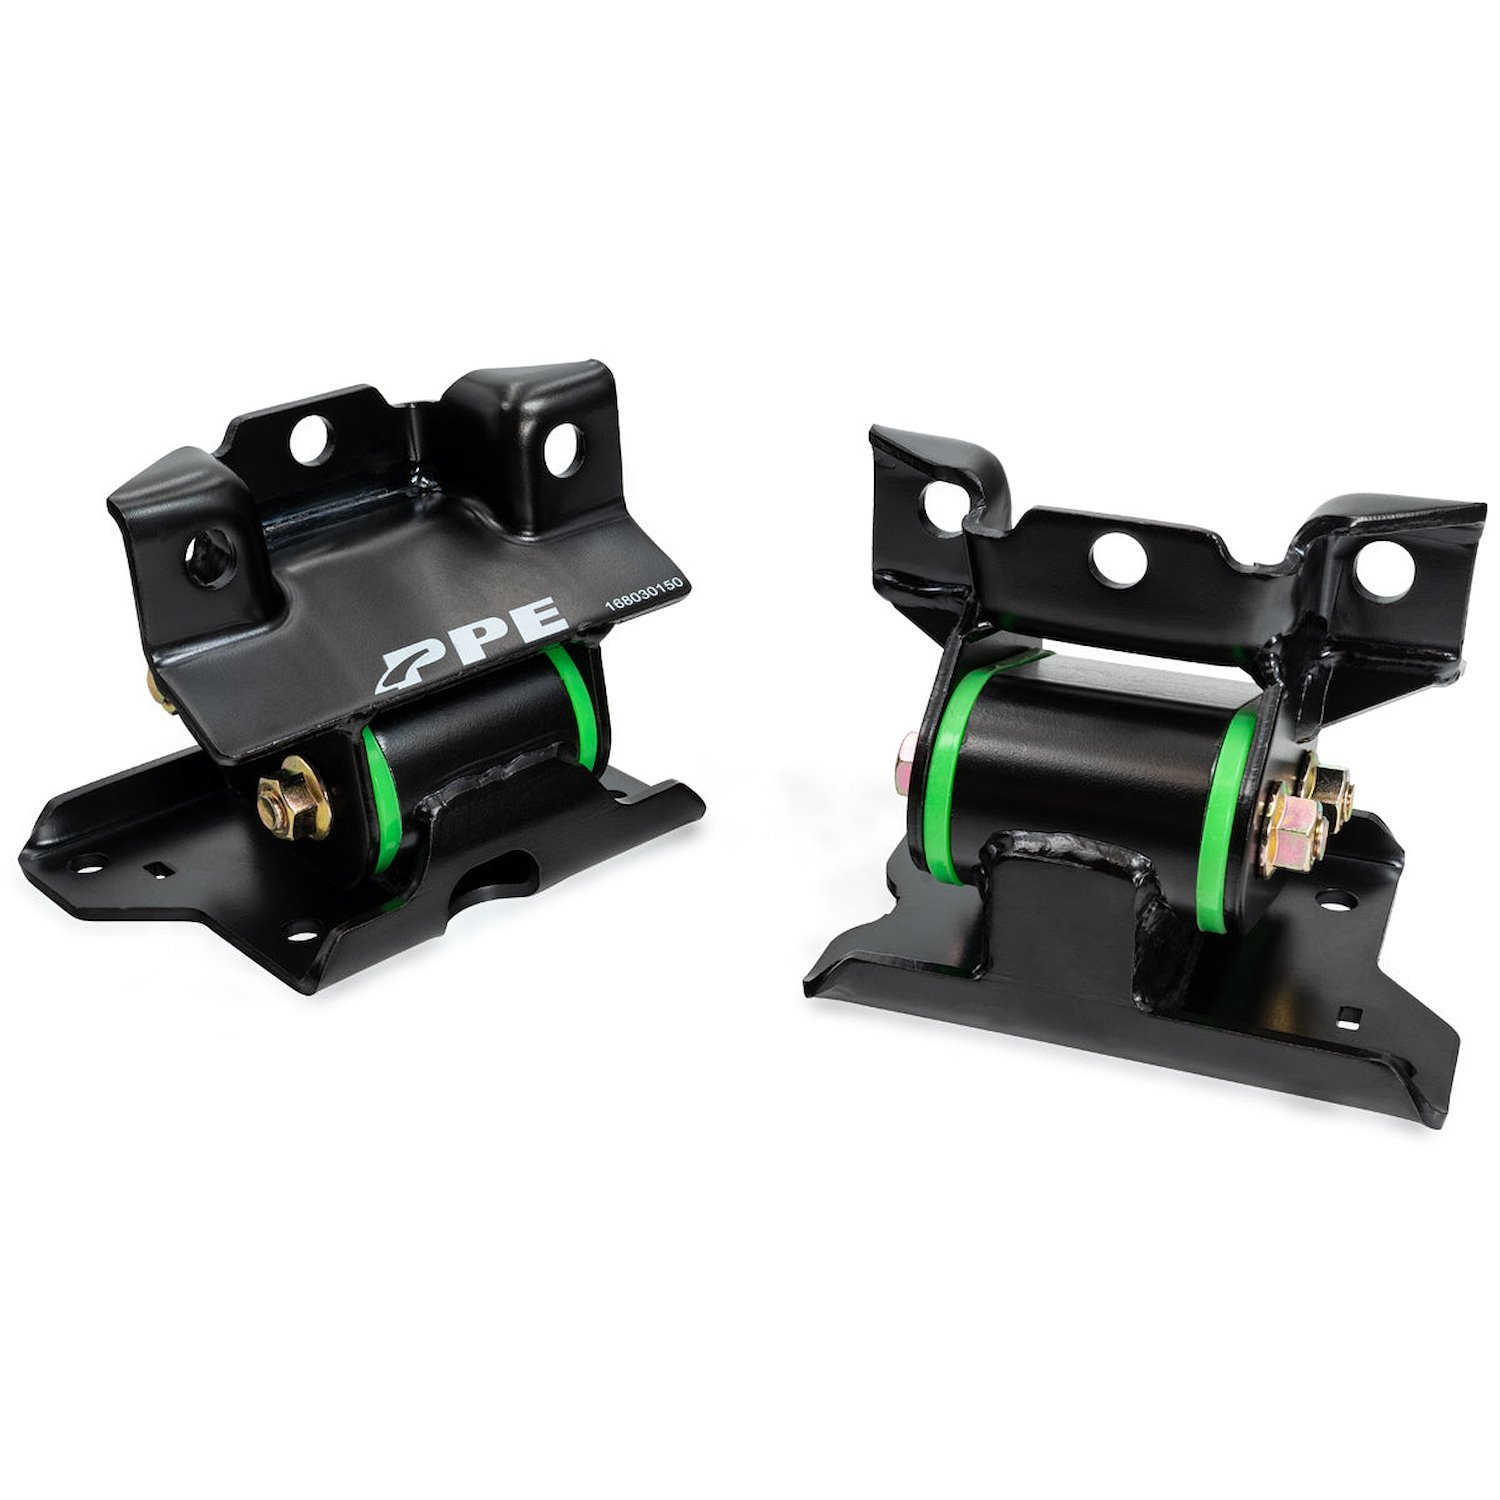 168030150 Engine Mount Kit with High-Performance Silicone Bushings - 01-10 GM 6.6L Duramax - 50 Hardness